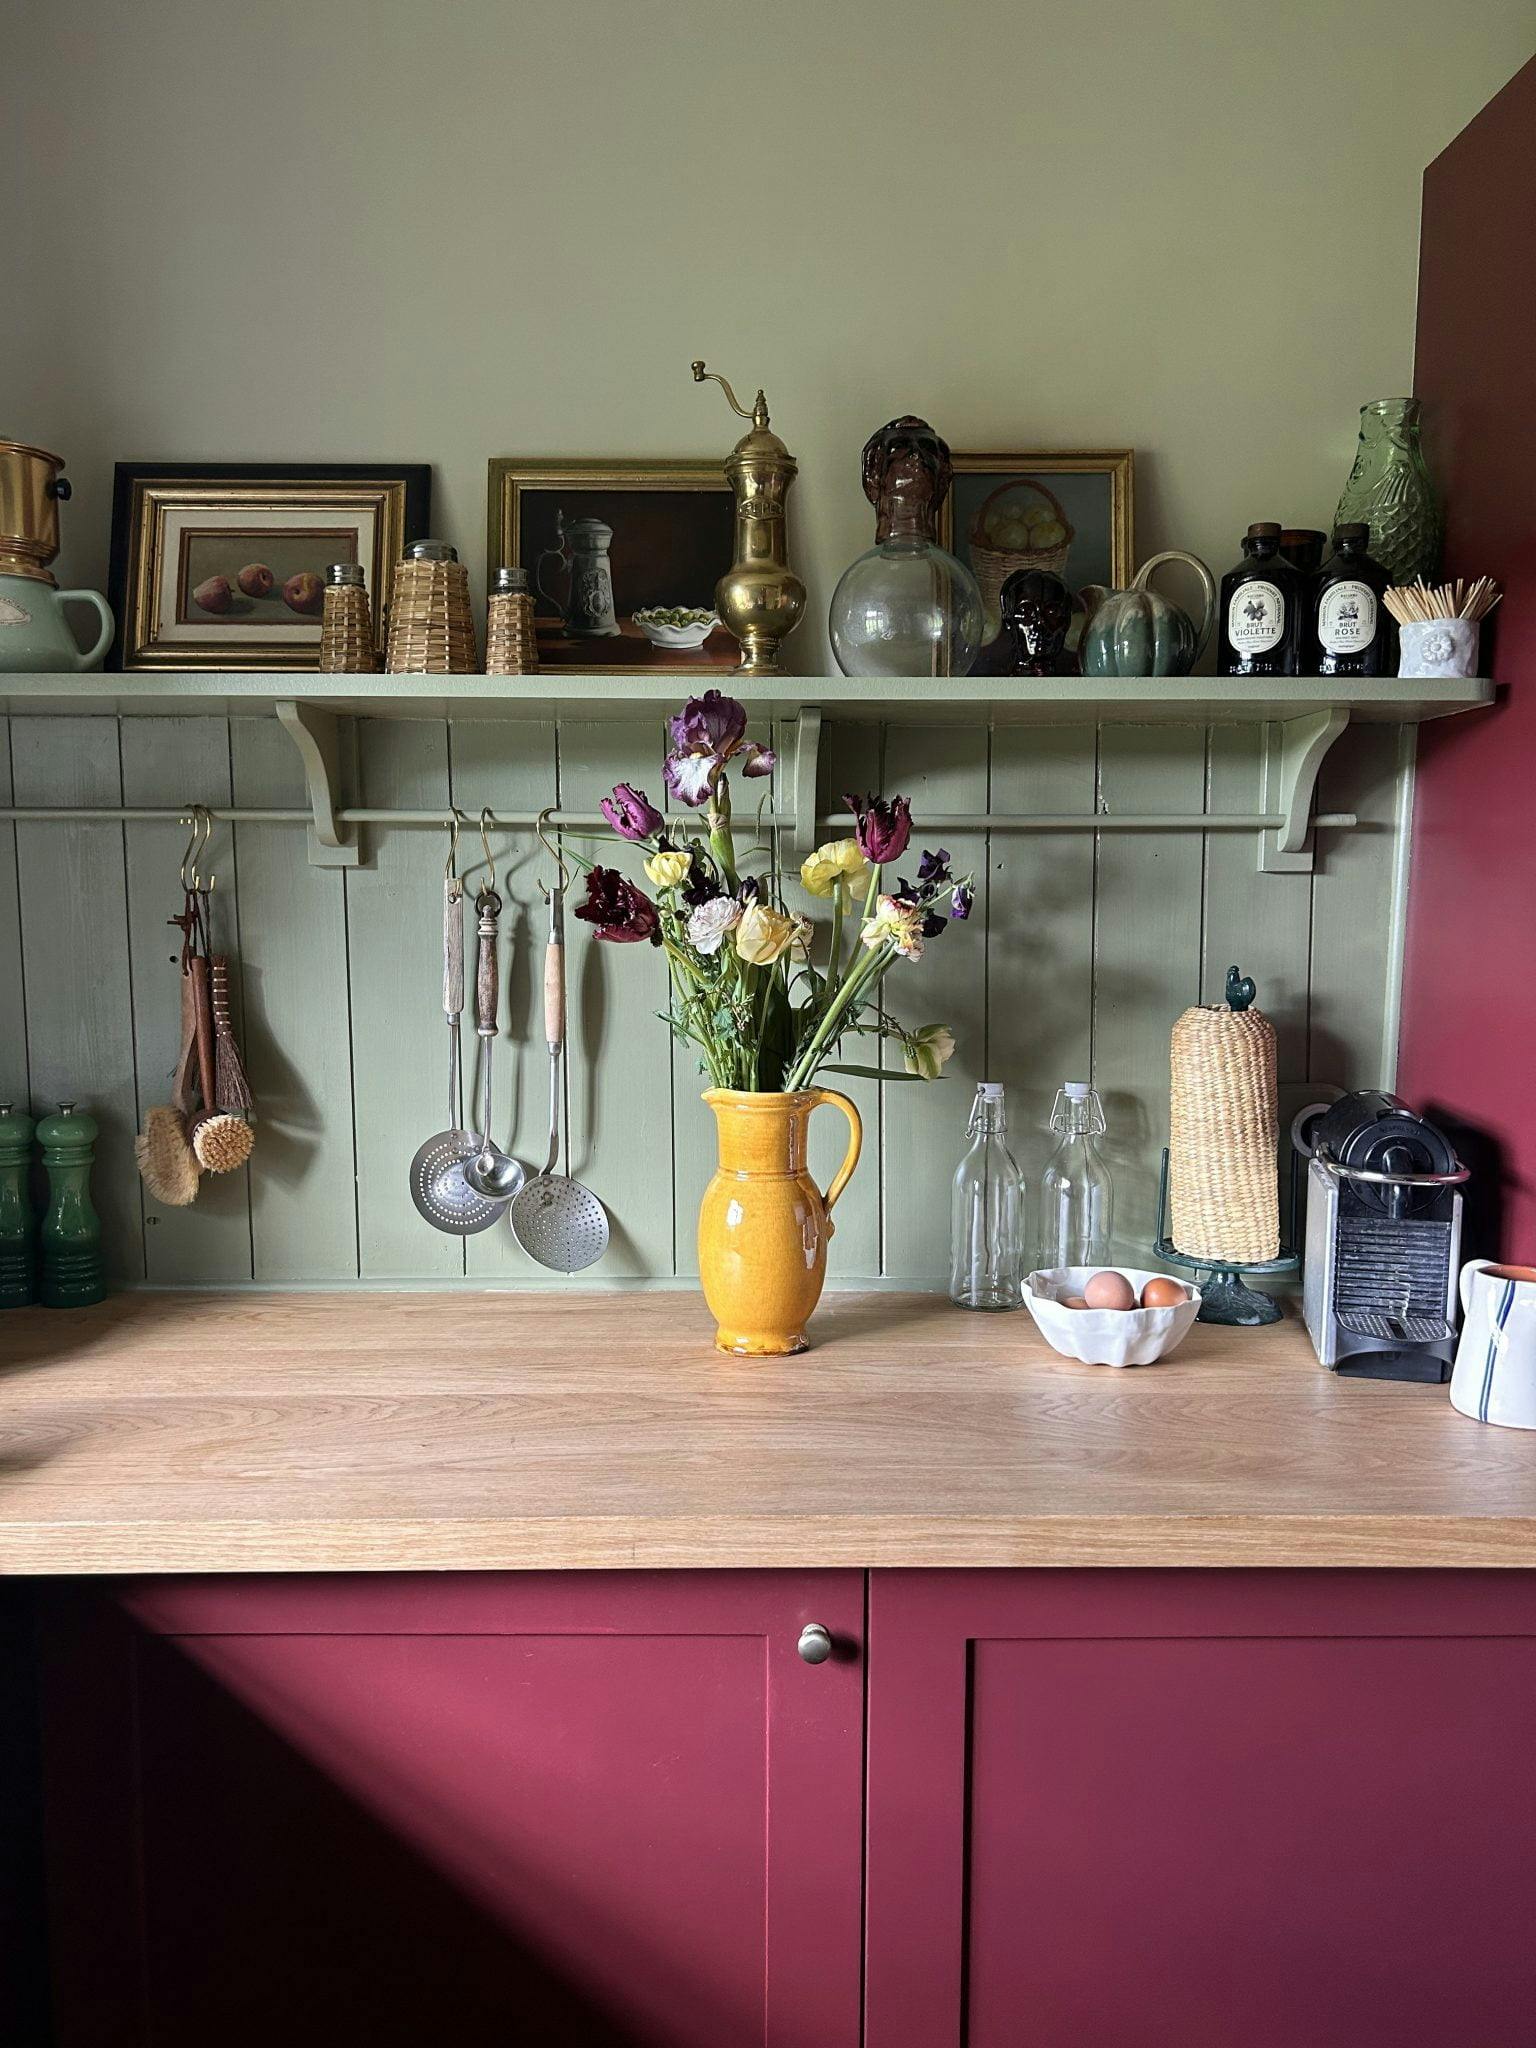 The kitchen of La Roquerie: red furniture and wooden countertop, bouquet of flowers